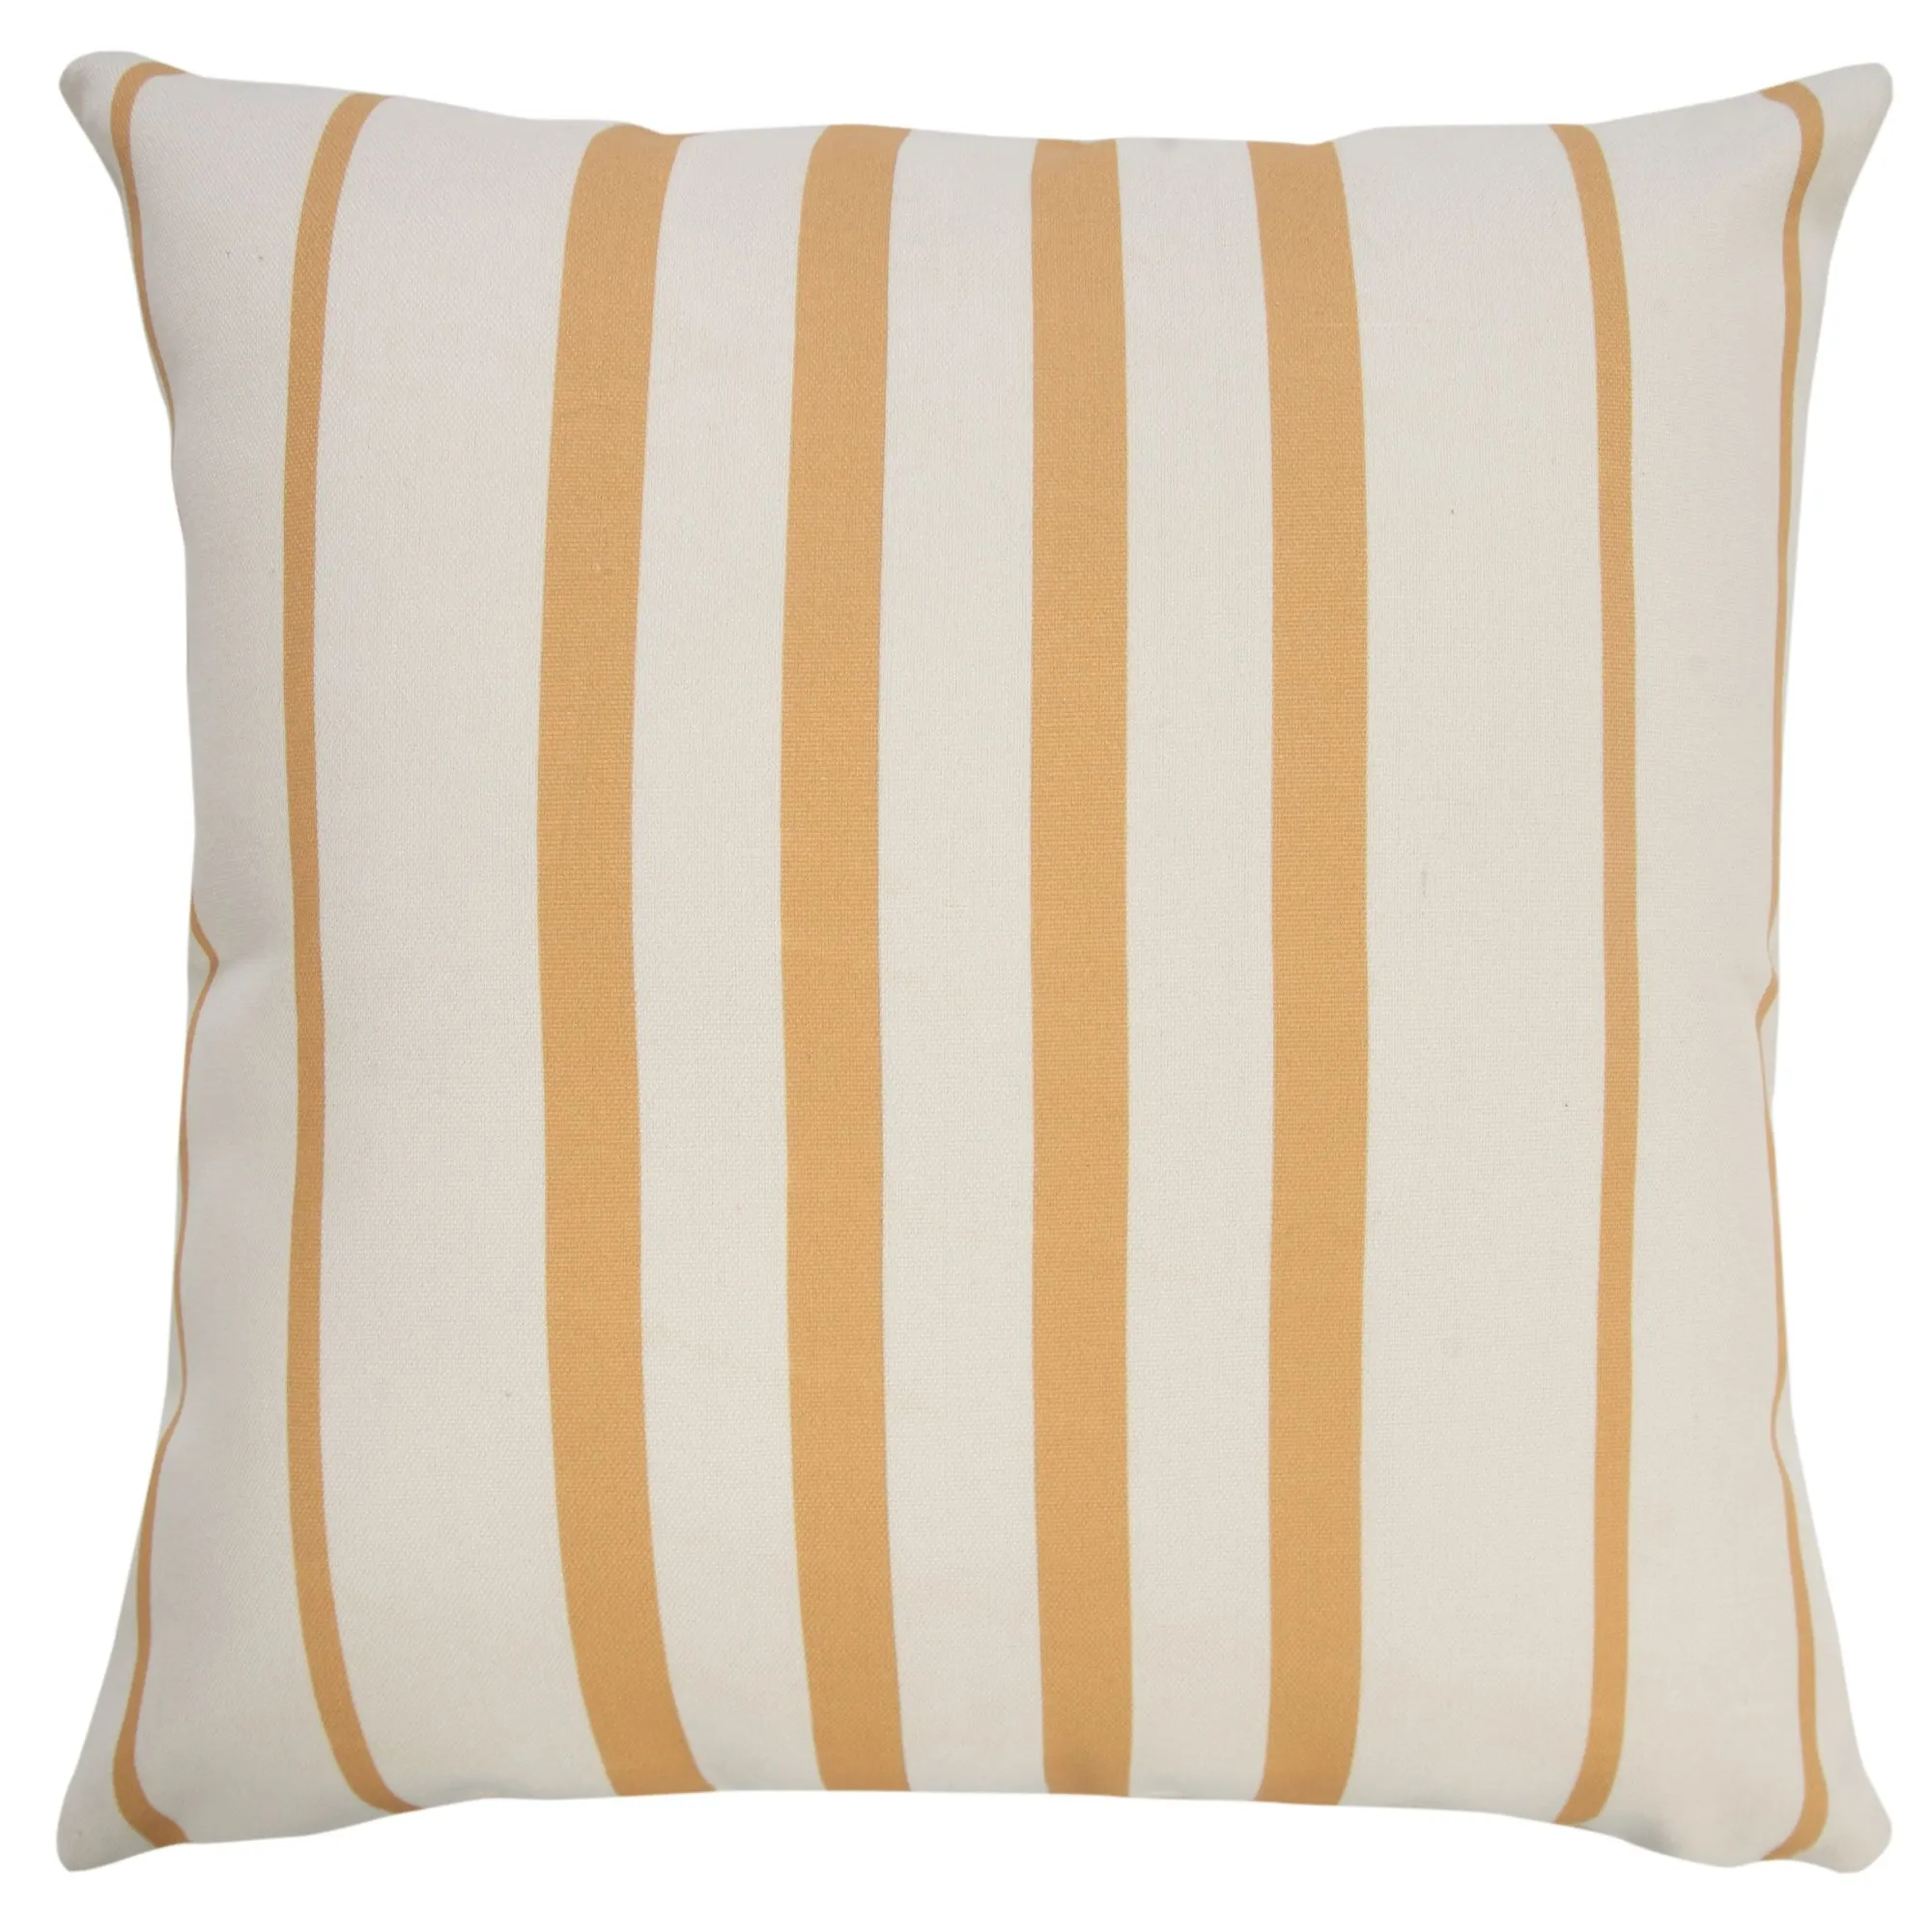 20" Yellow and White Striped Pattern Outdoor Square Throw Pillow